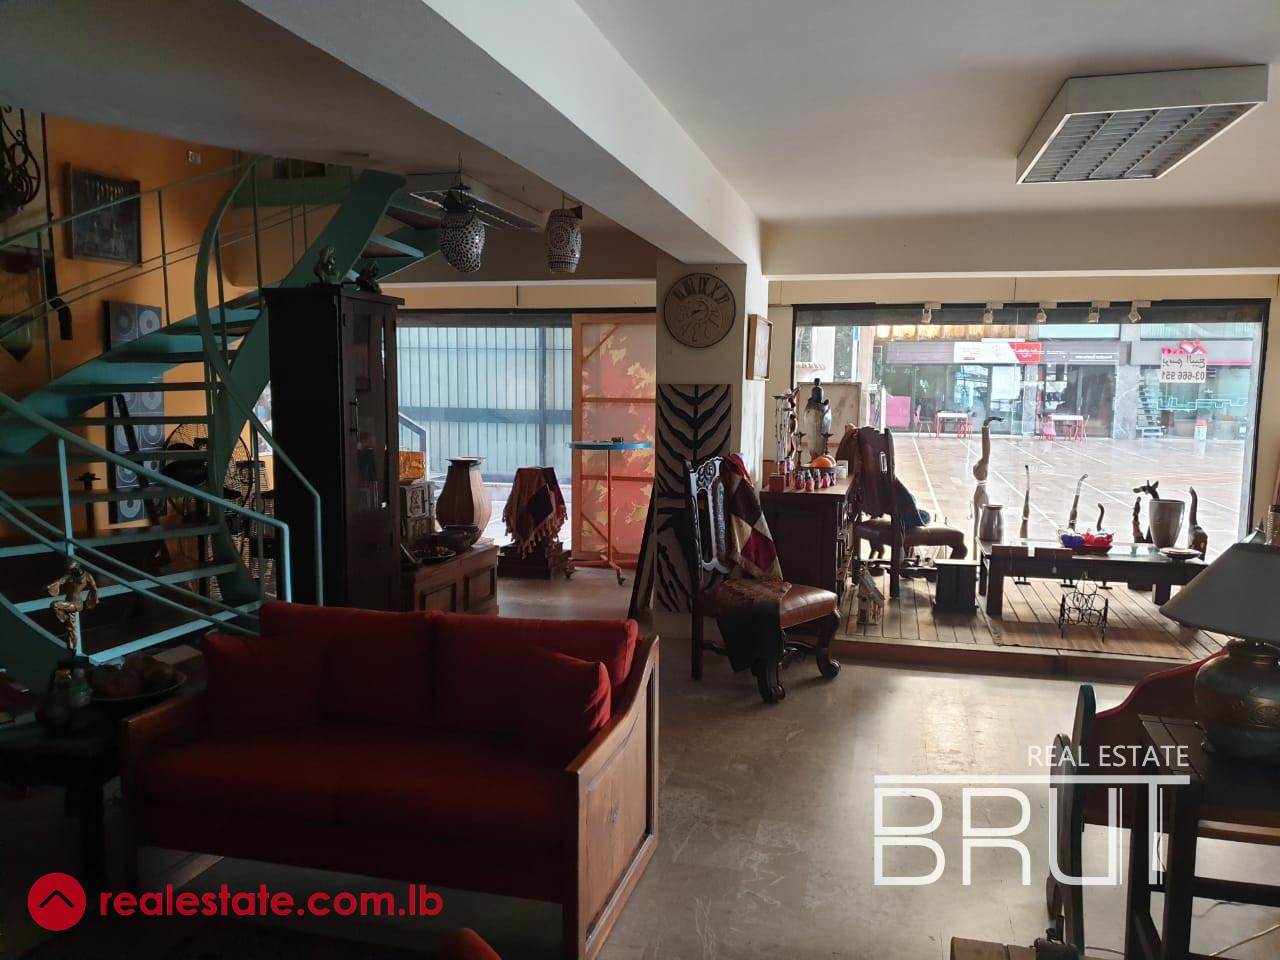 Spacious shop in the heart of Jounieh